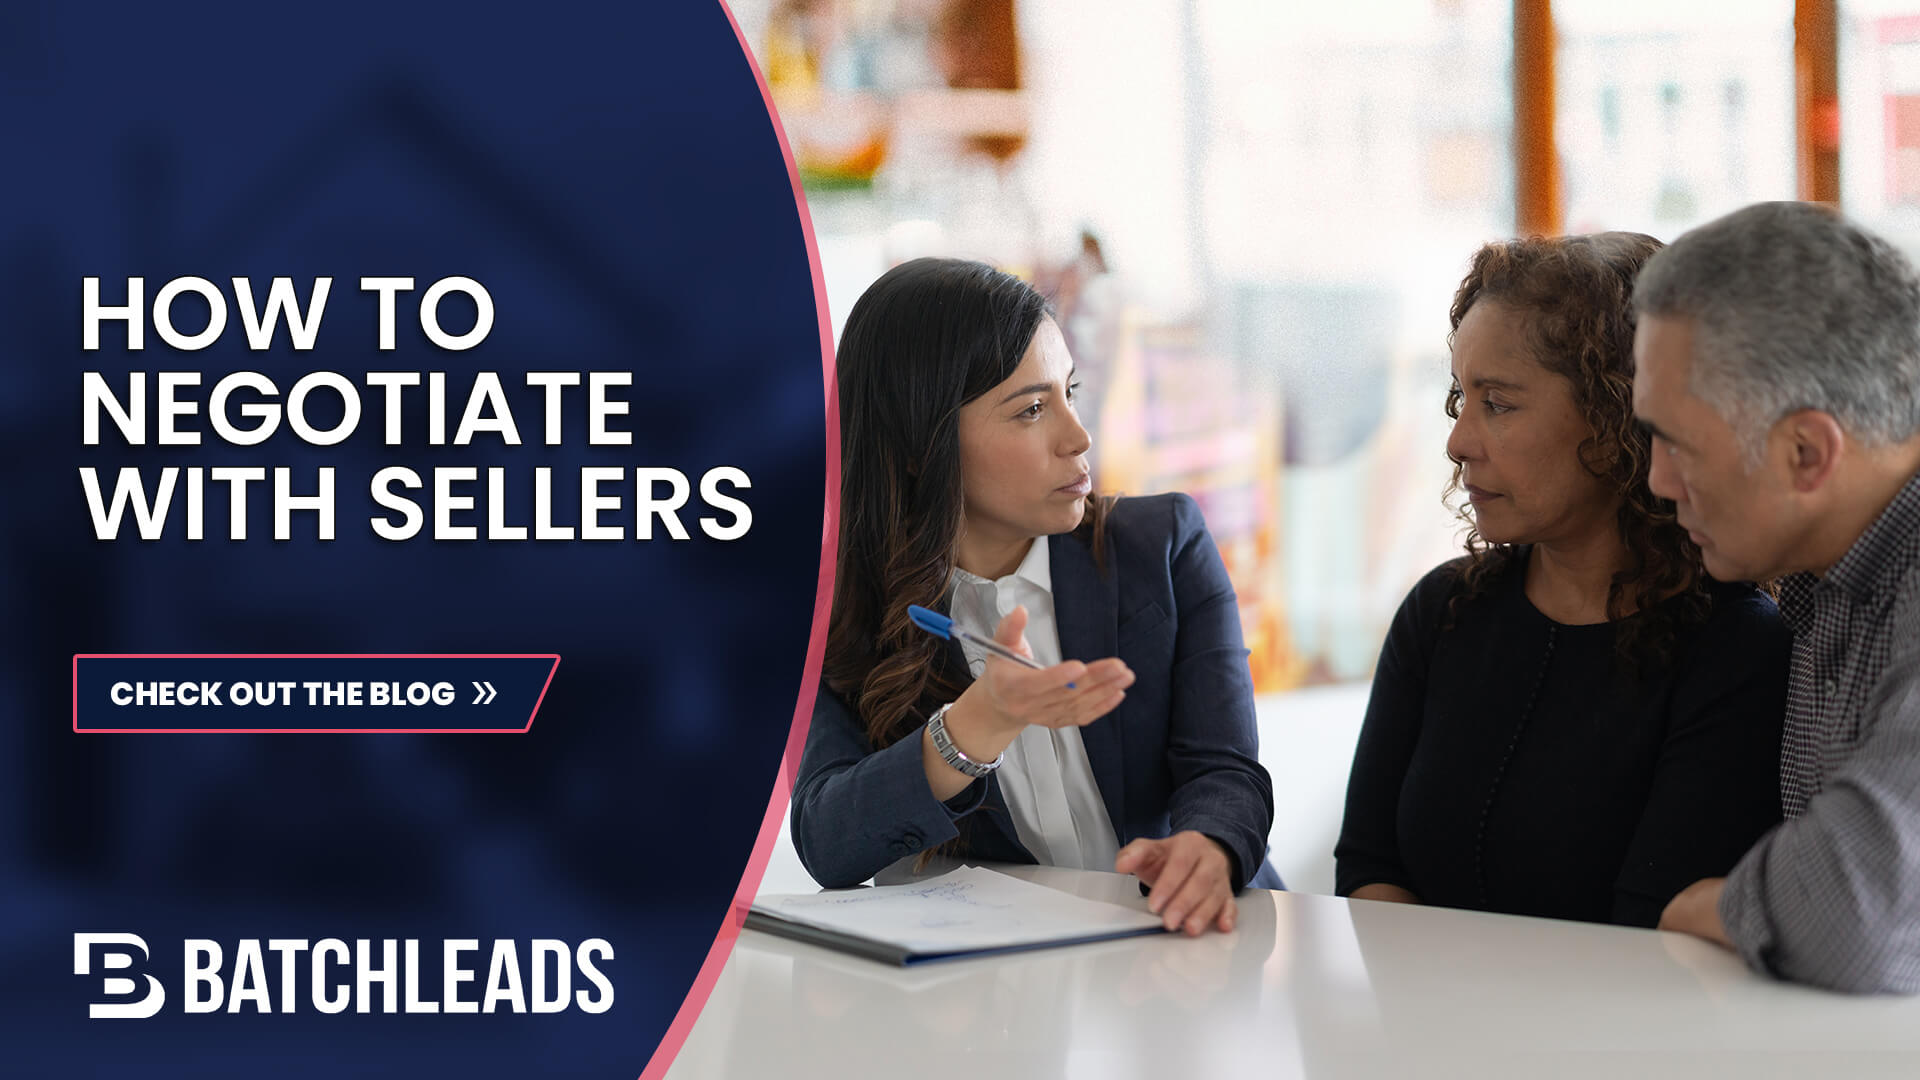 HOW TO NEGOTIATE WITH SELLERS